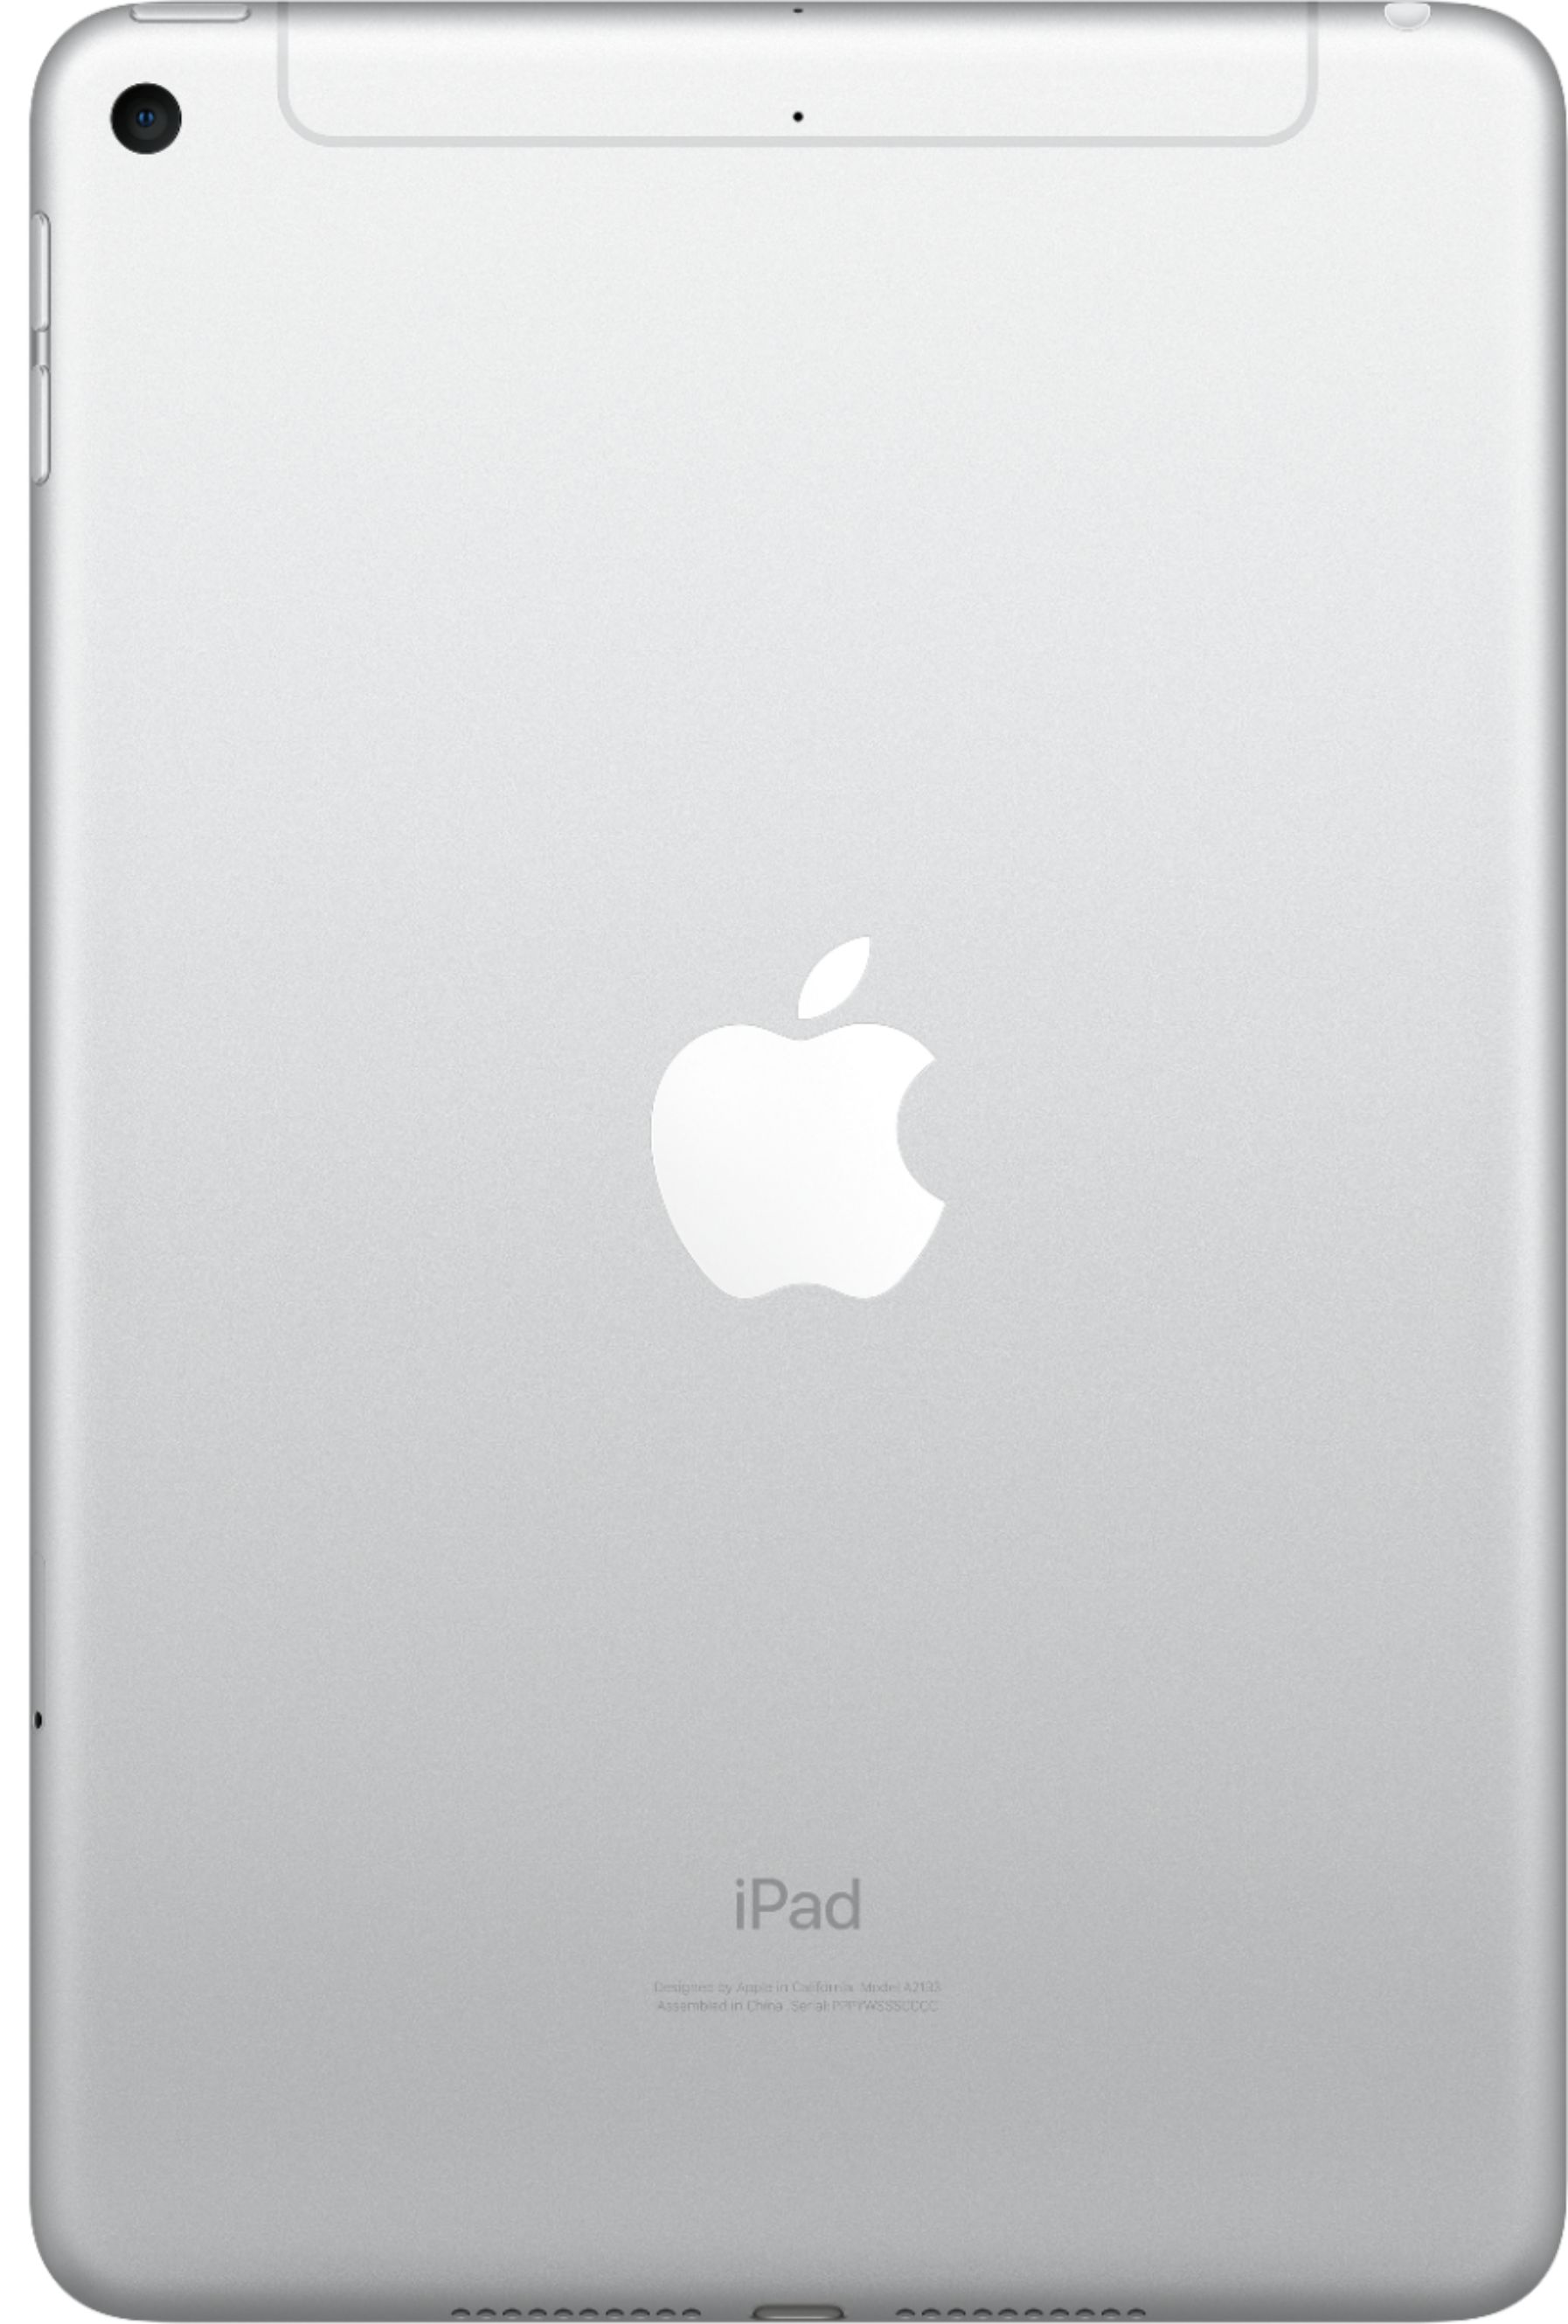 Back View: Apple - 10.2-Inch iPad (9th Generation) with Wi-Fi - 64GB - Space Gray